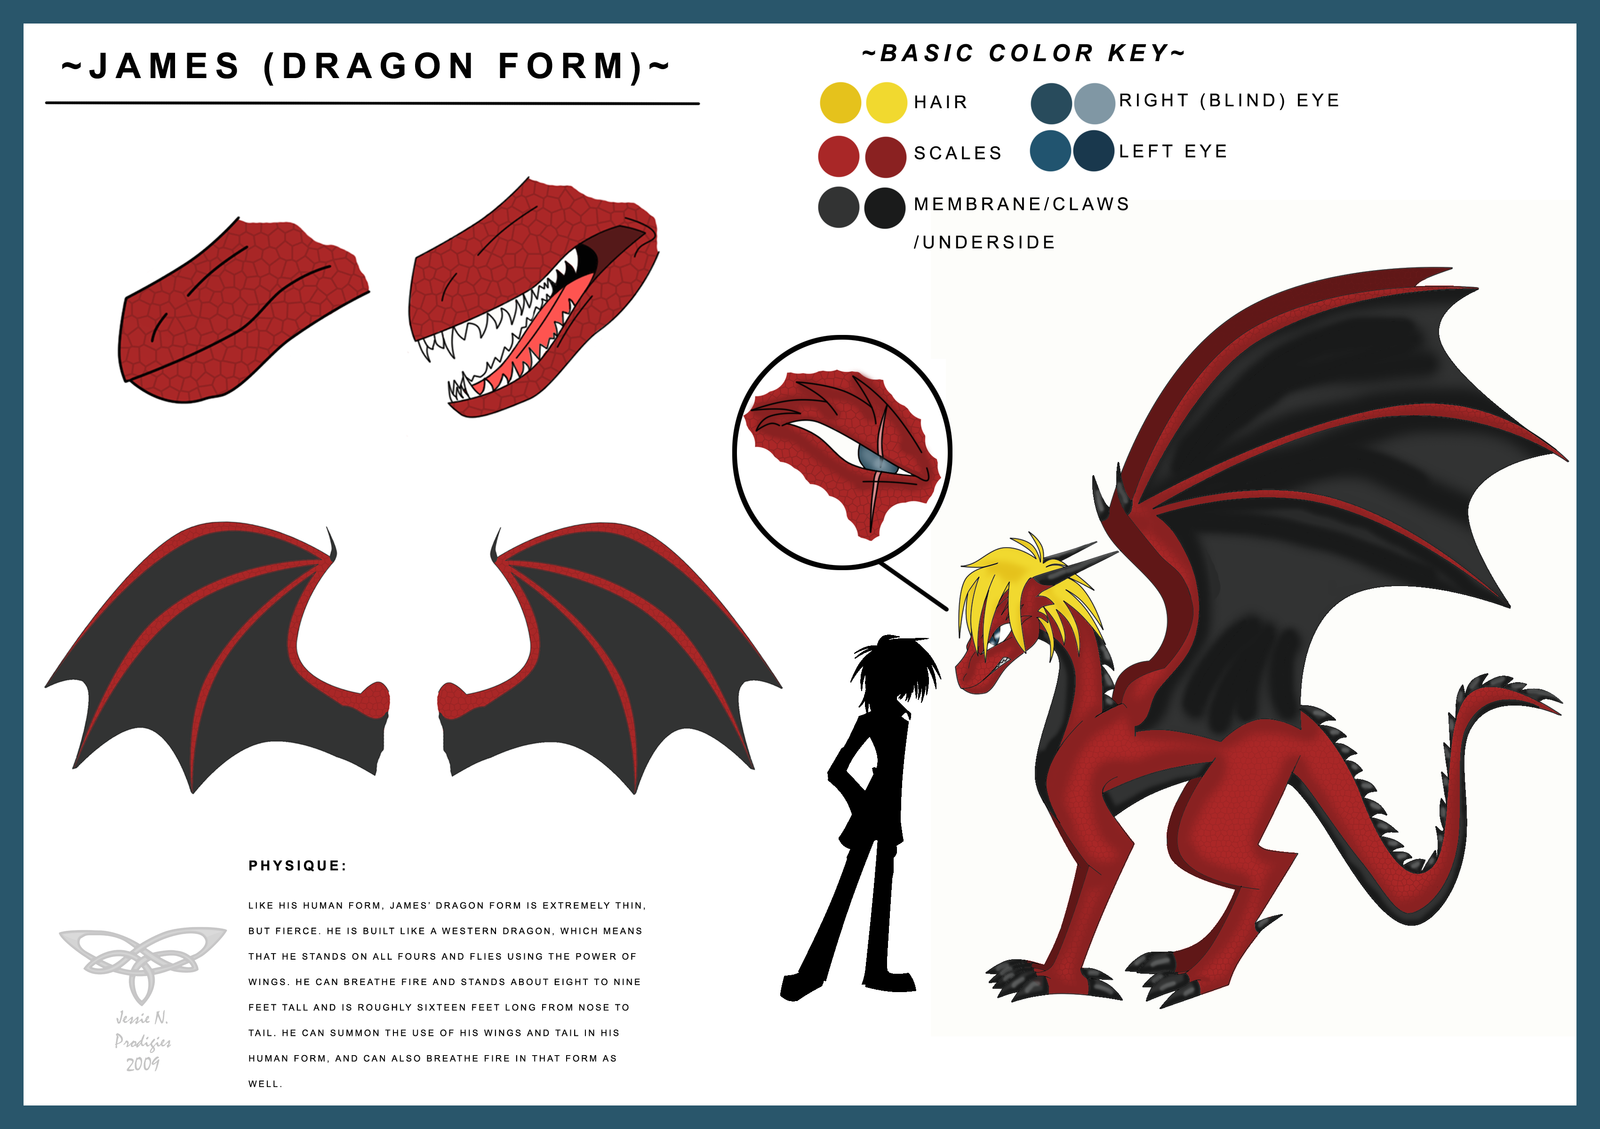 Character Sheet: James (Dragon Form) by Prodigies